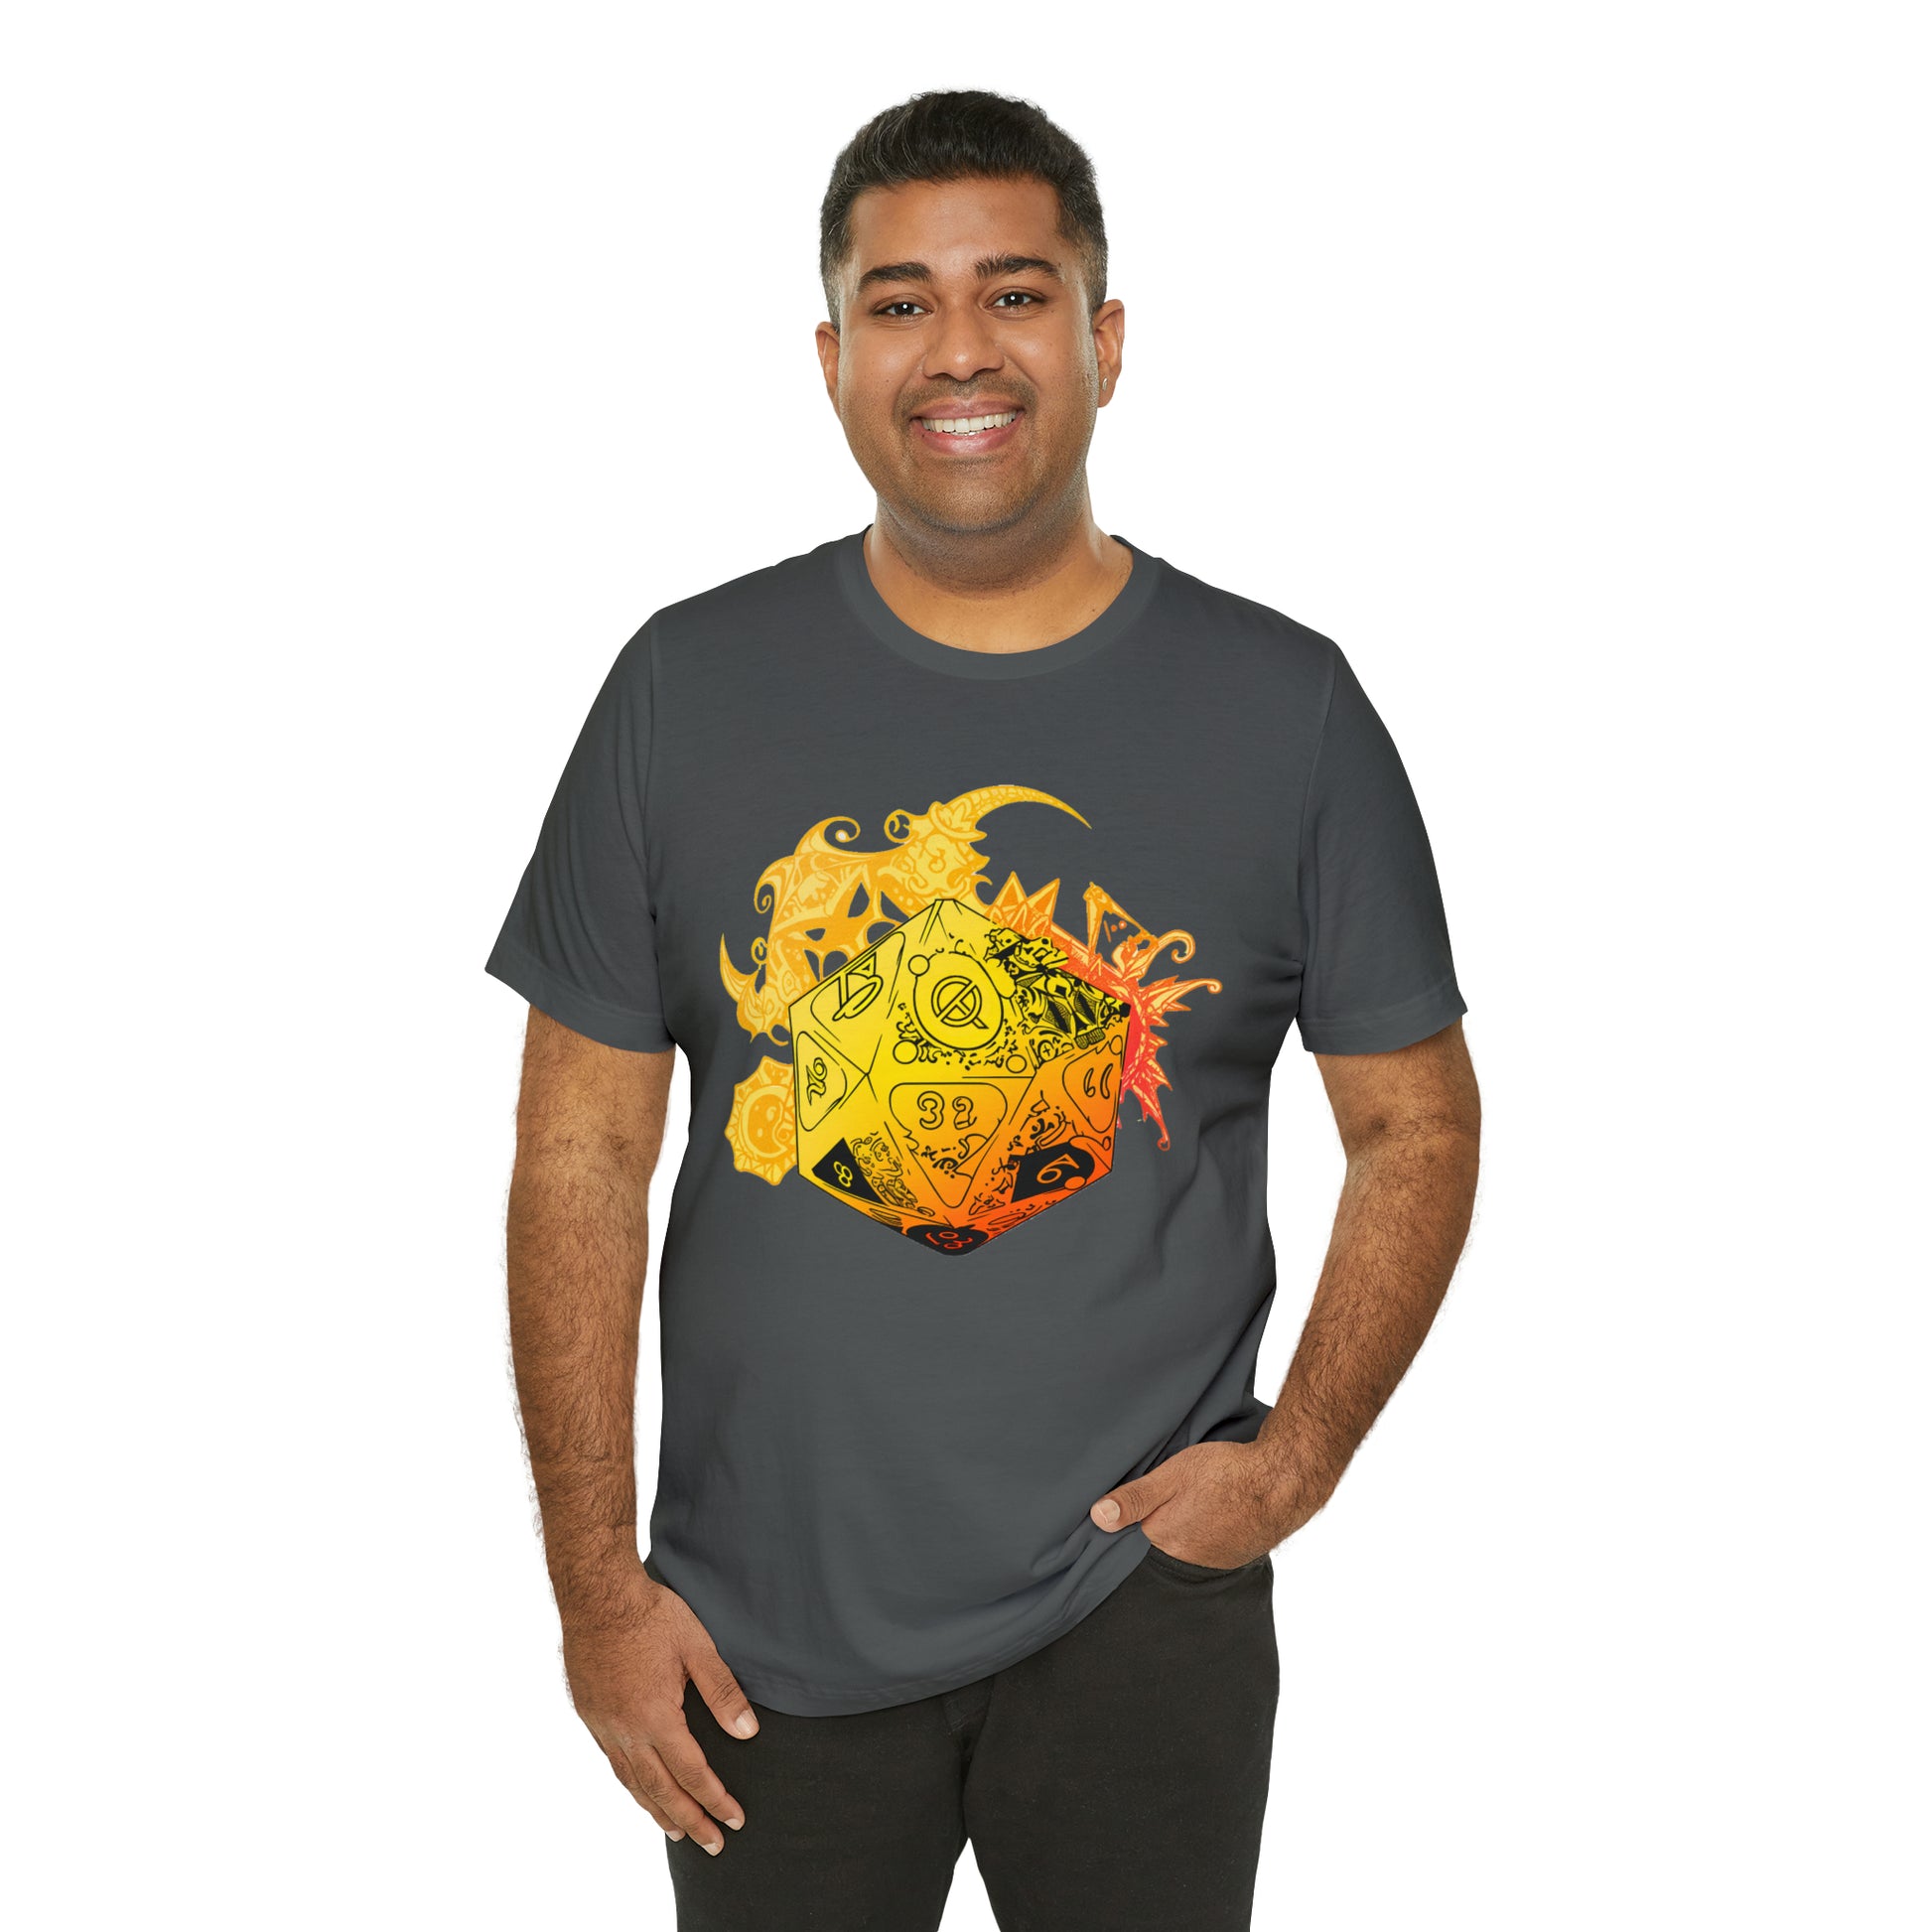 asphalt-quest-thread-tee-shirt-with-large-yellow-dragon-dice-on-center-of-shirt